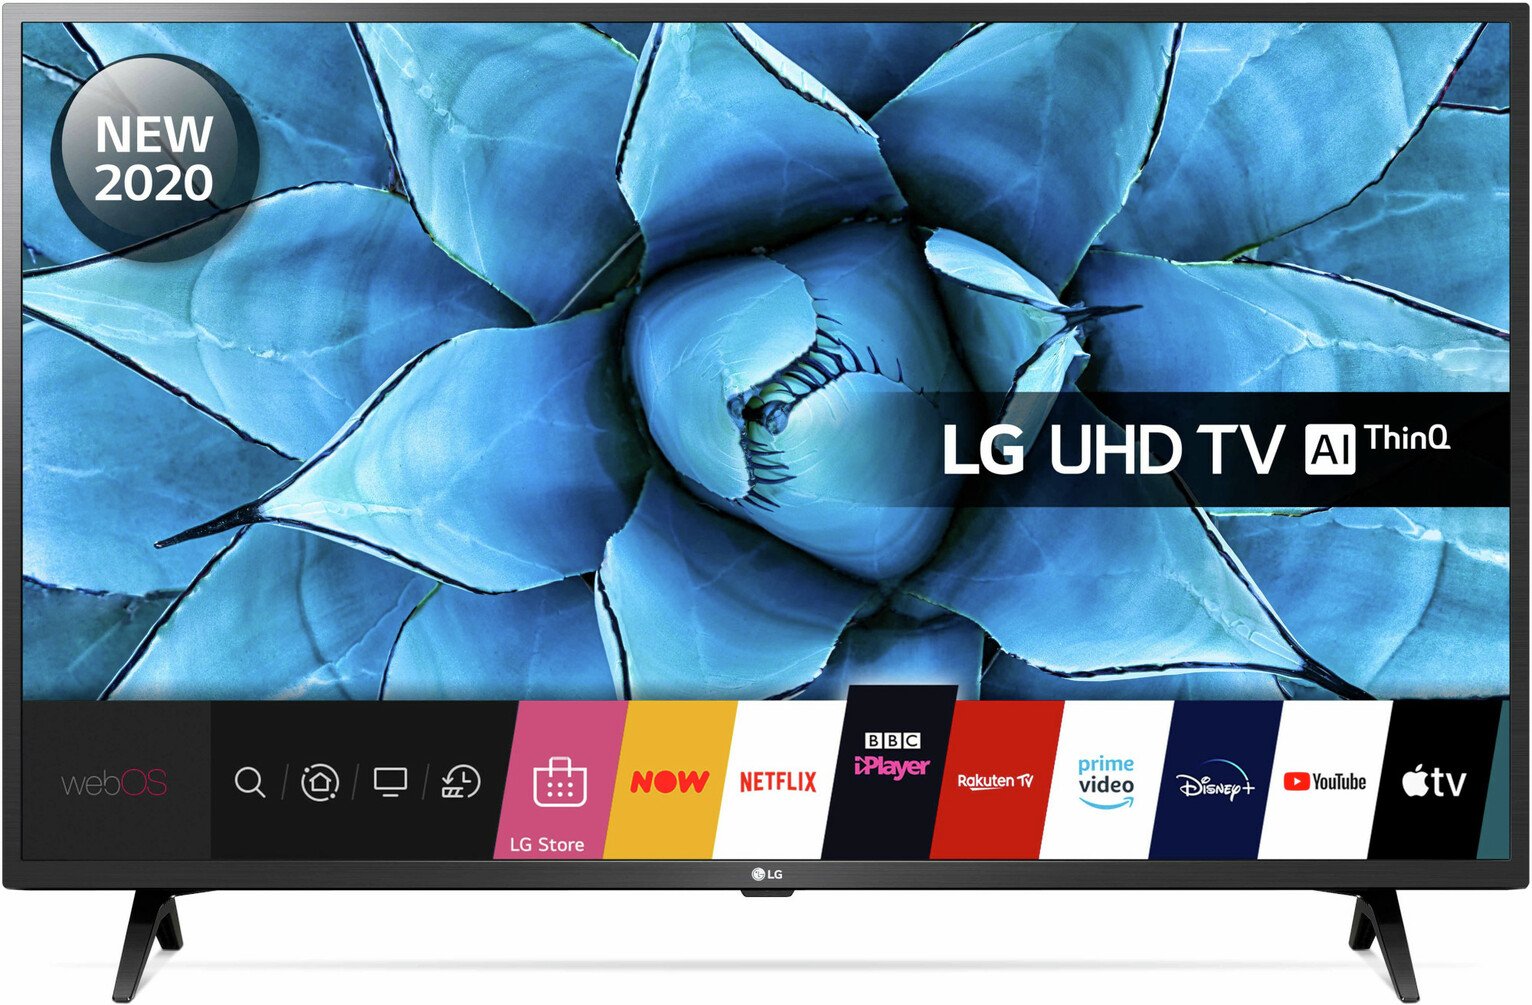 LG 65 Inch 65UN7300 Smart 4K Ultra HD LED TV with HDR Review